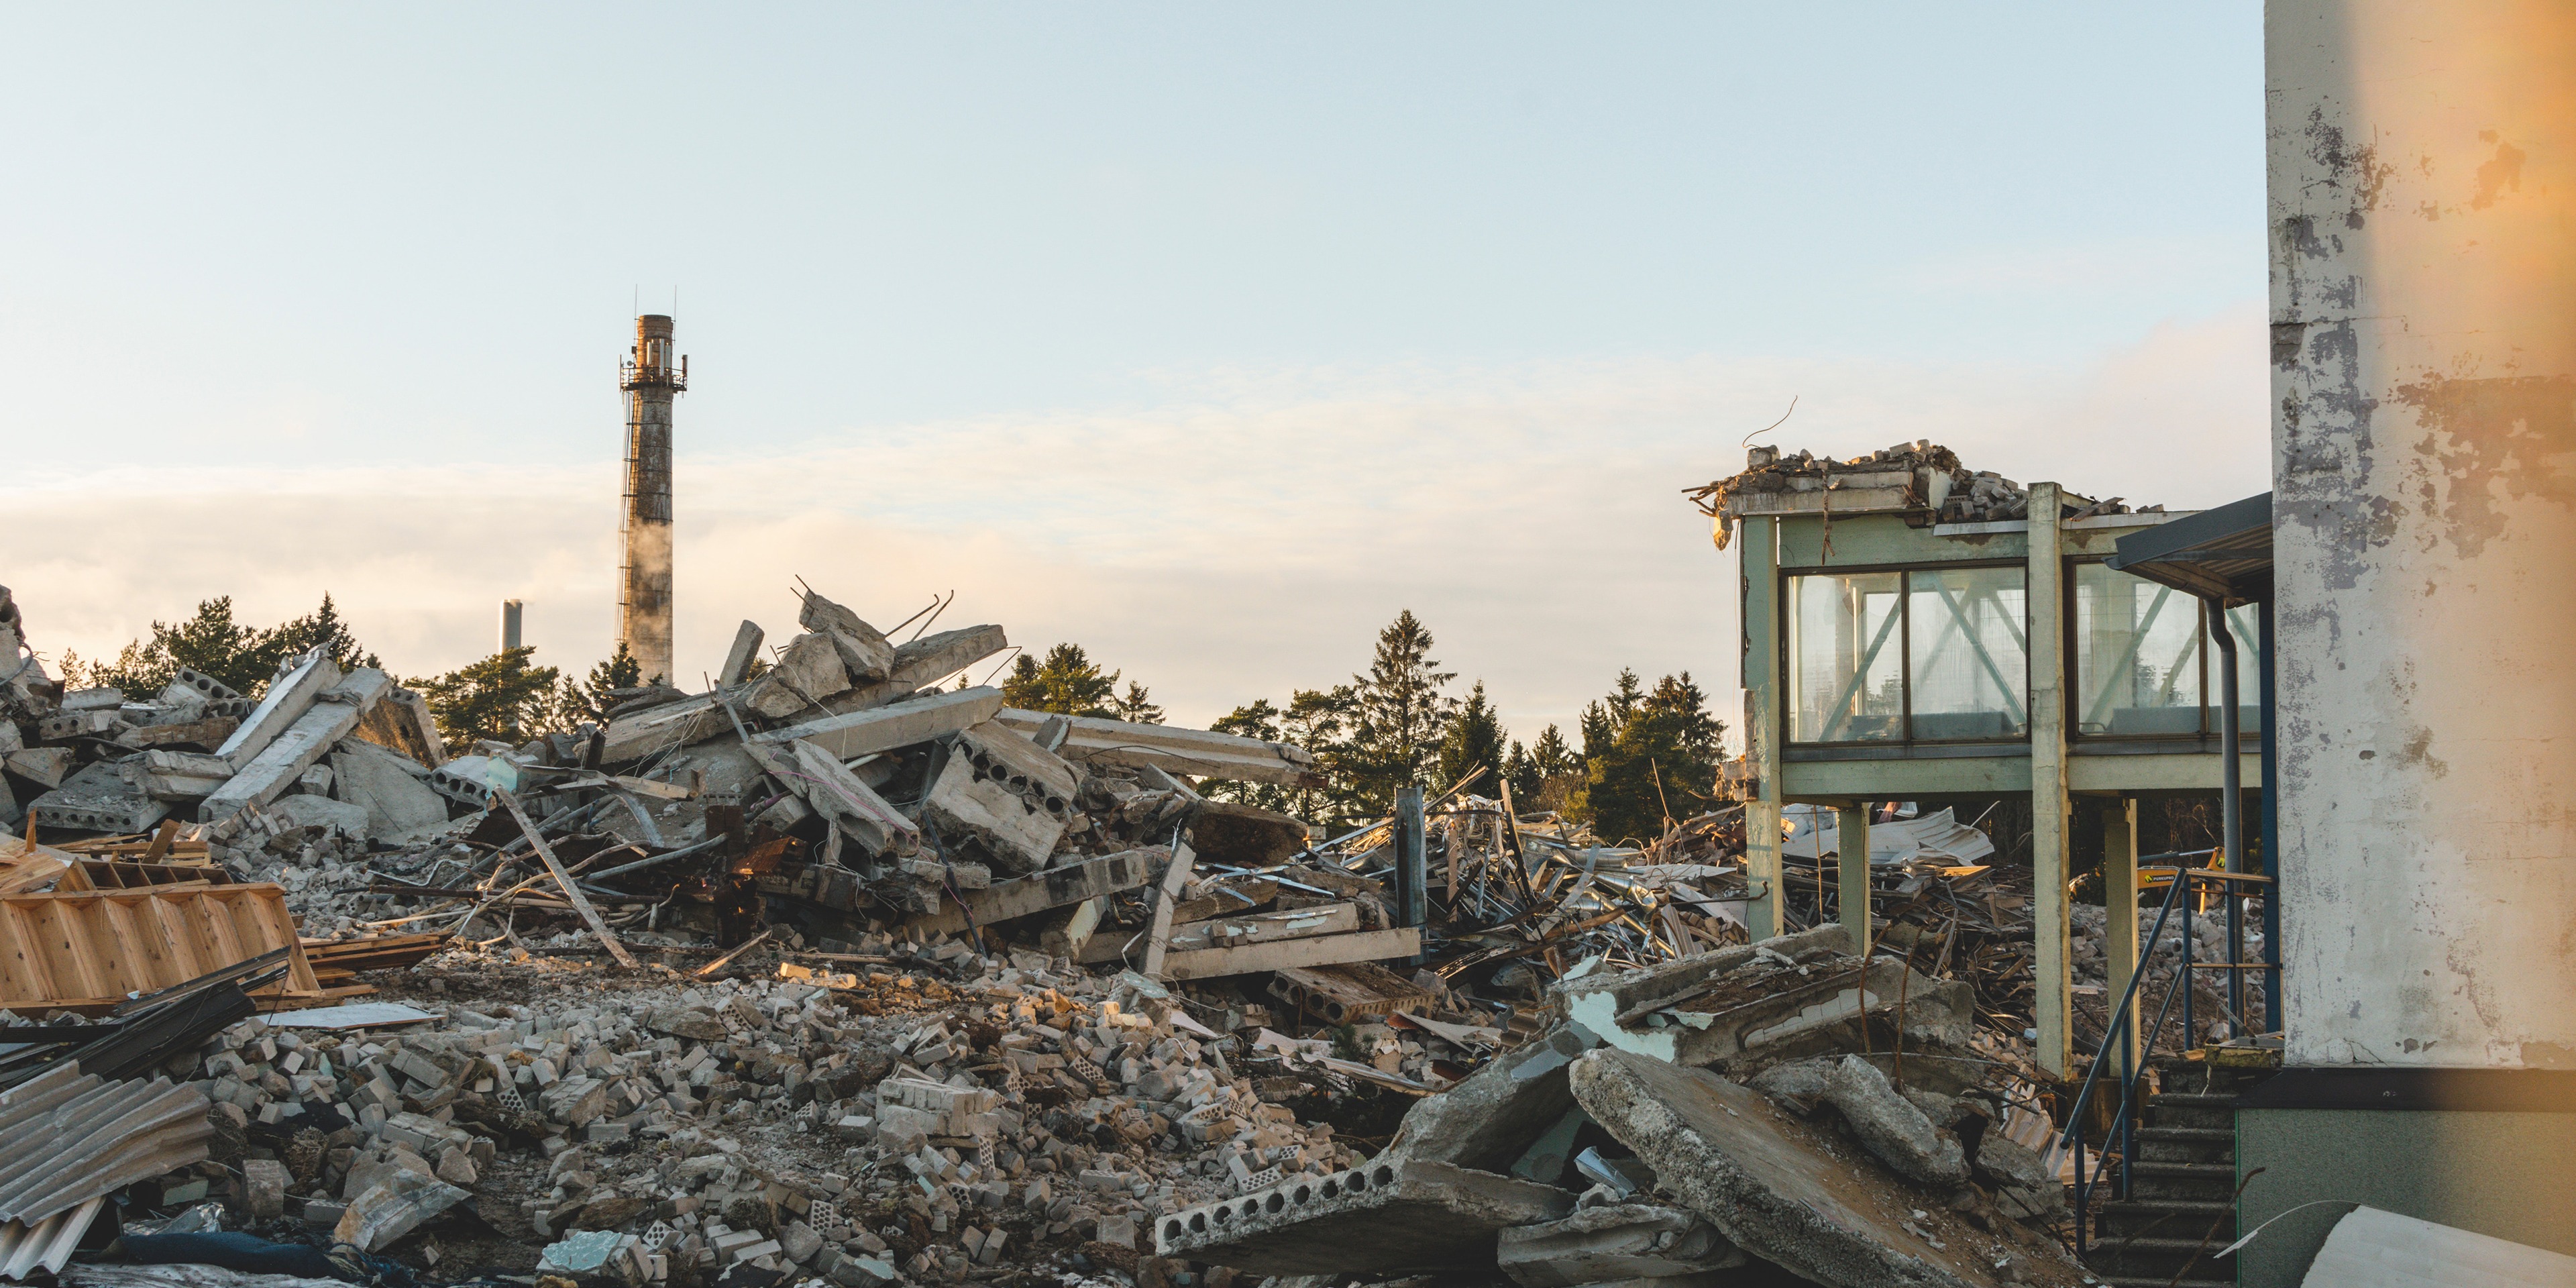 A pile of debris from a devastated building in an industrial area.